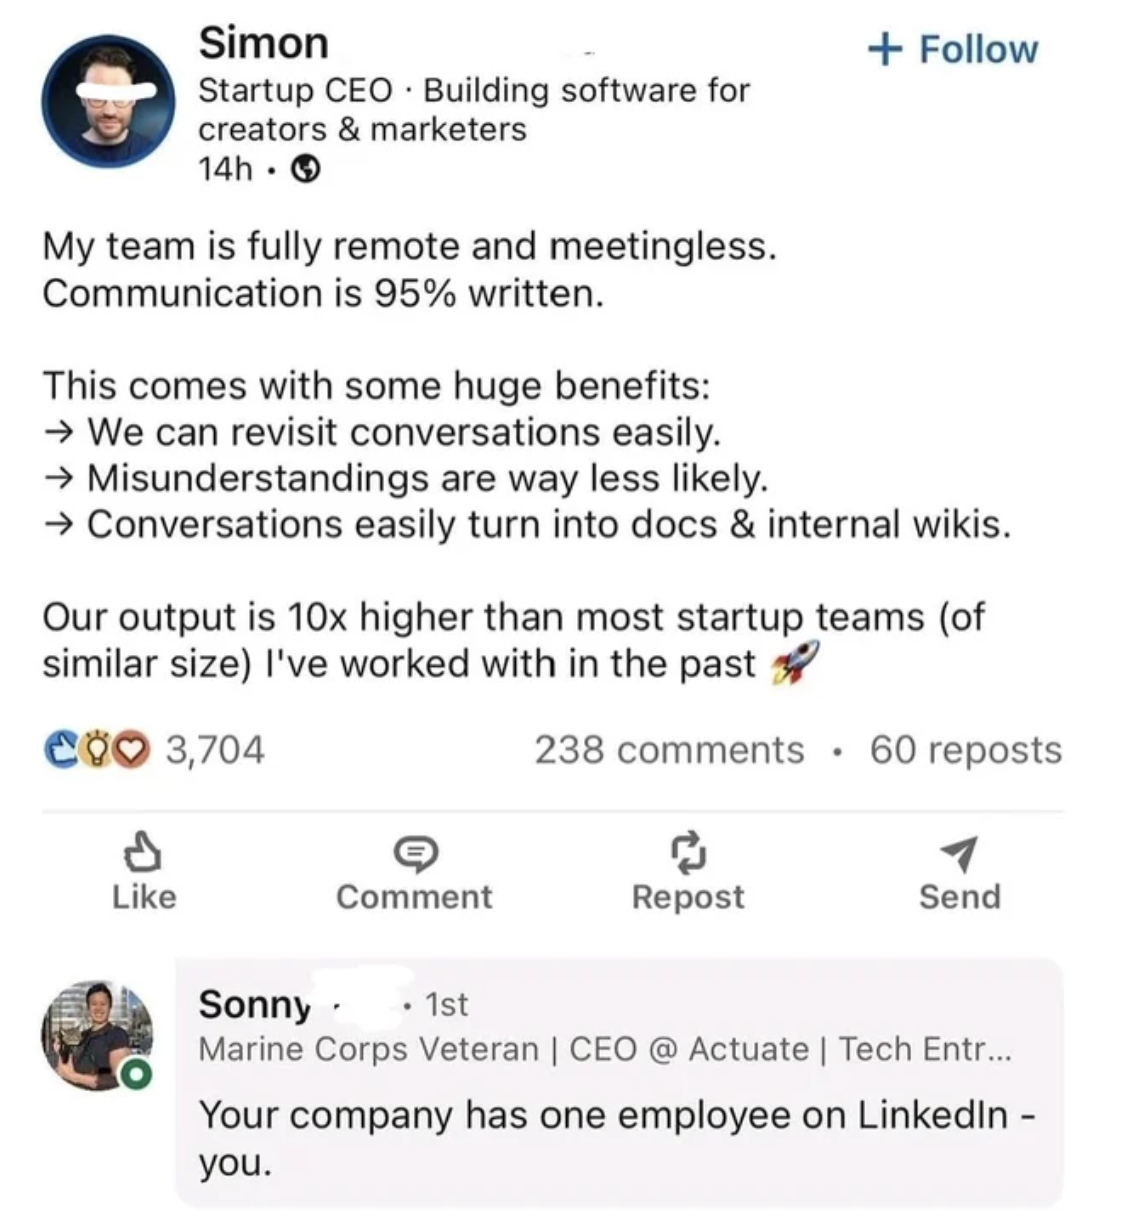 screenshot - Simon Startup Ceo Building software for creators & marketers 14h. My team is fully remote and meetingless. Communication is 95% written. This comes with some huge benefits We can revisit conversations easily. Misunderstandings are way less ly